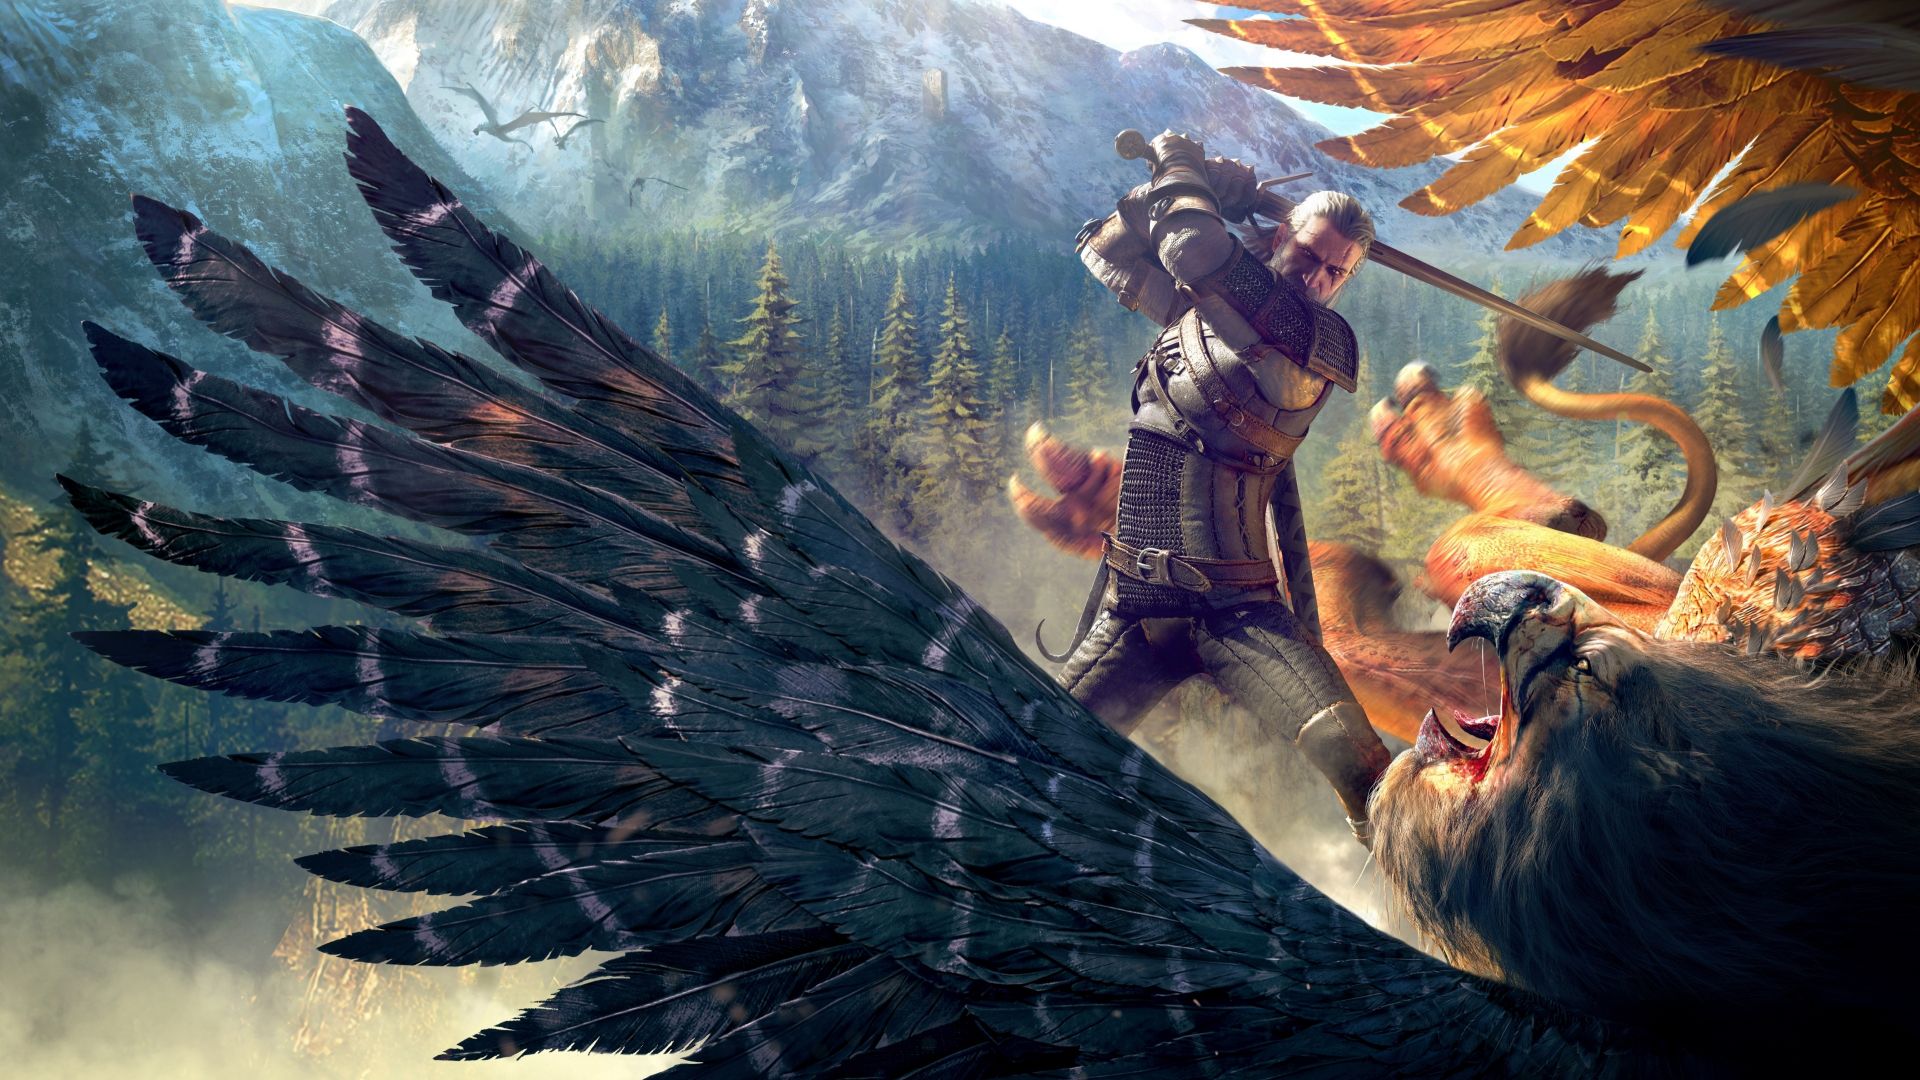 The Witcher 2020 Wallpapers